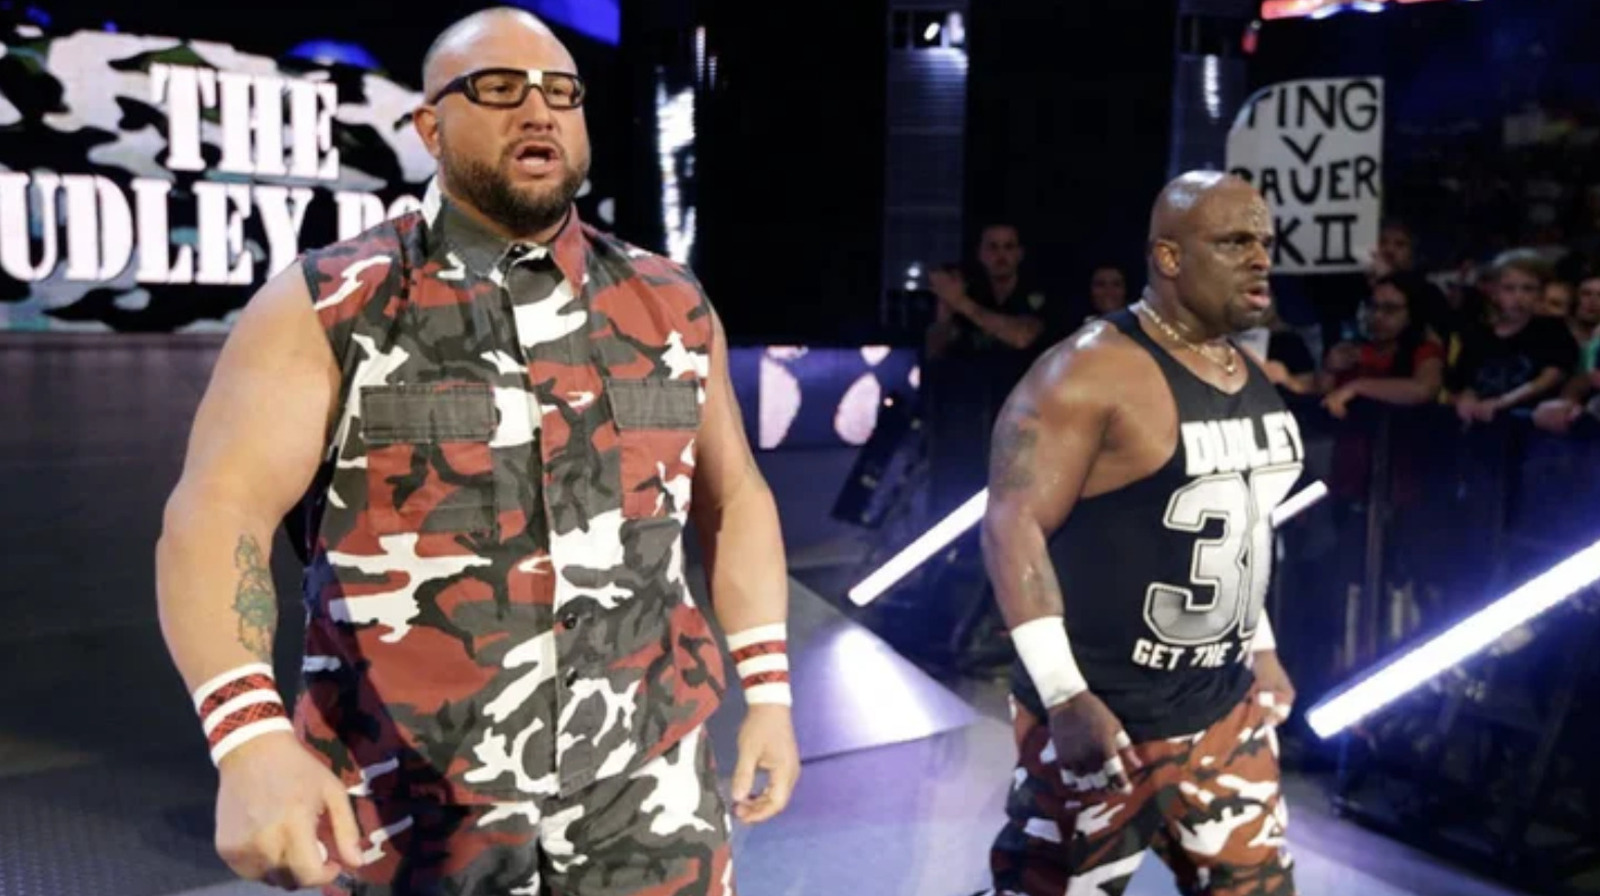 Dudley Boyz To Wrestle First Tag Match Since 2016 On Impact Special